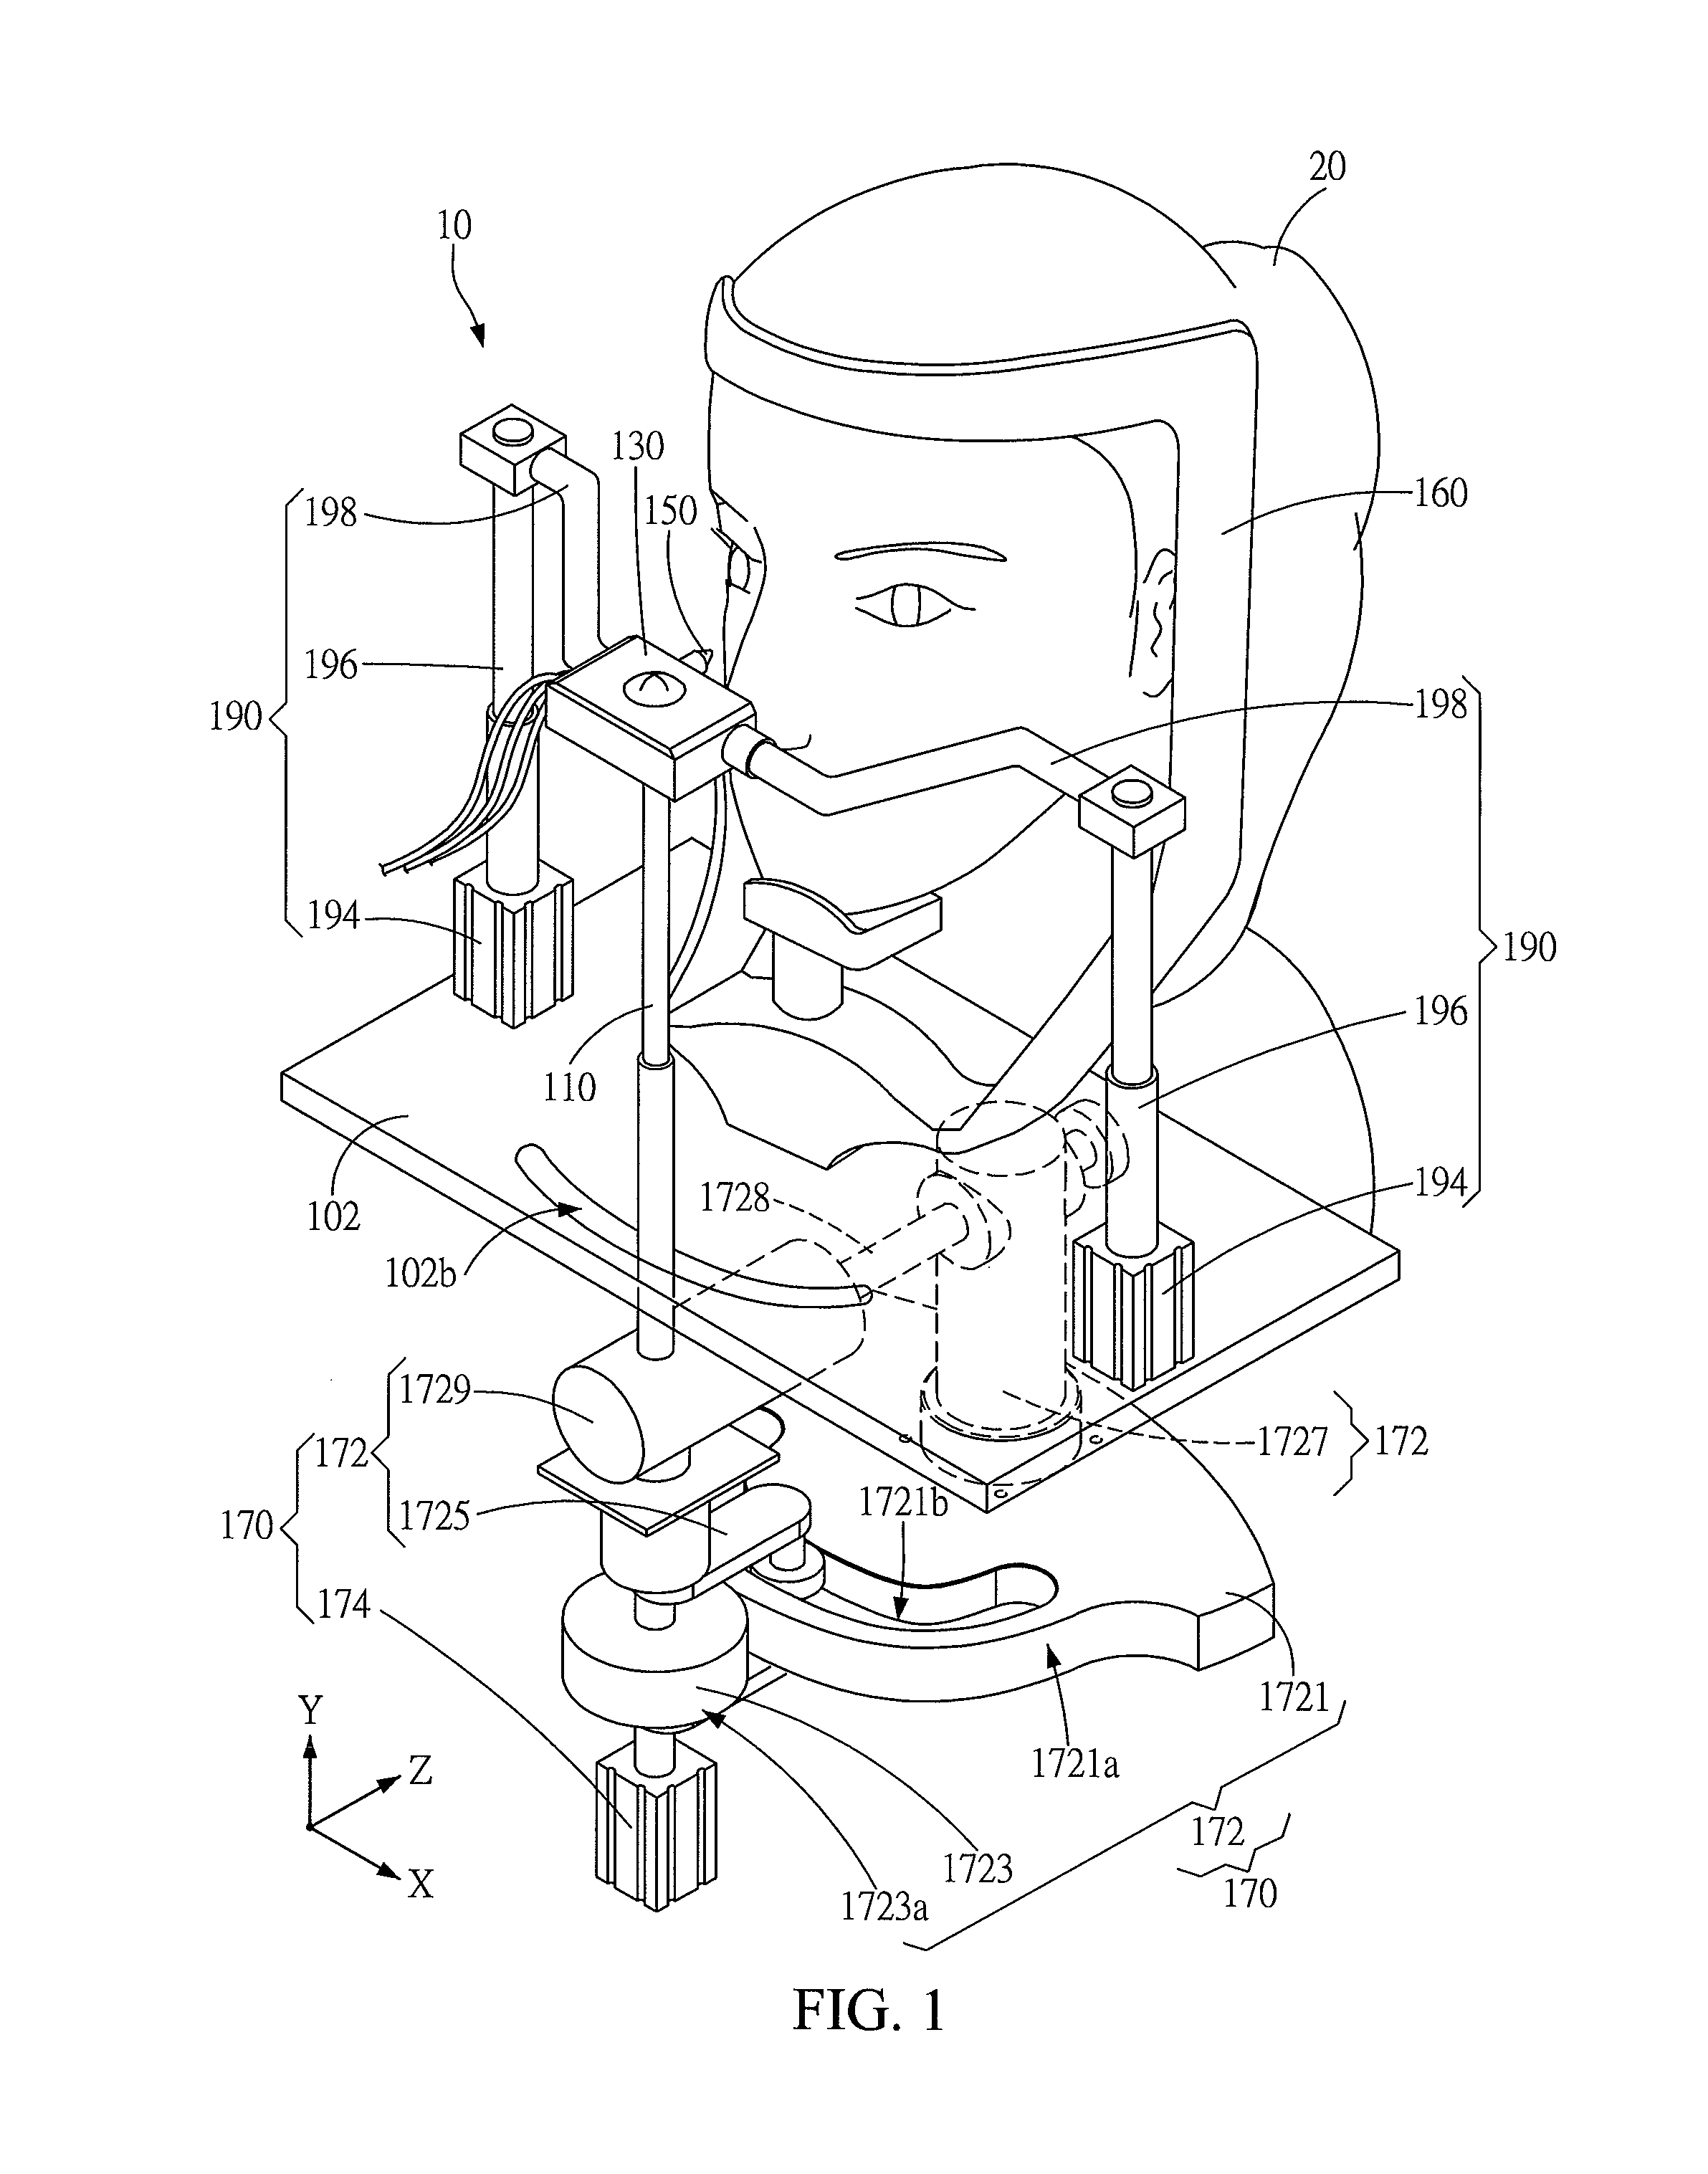 Automatic coloring device for moving coloring tool along a curve